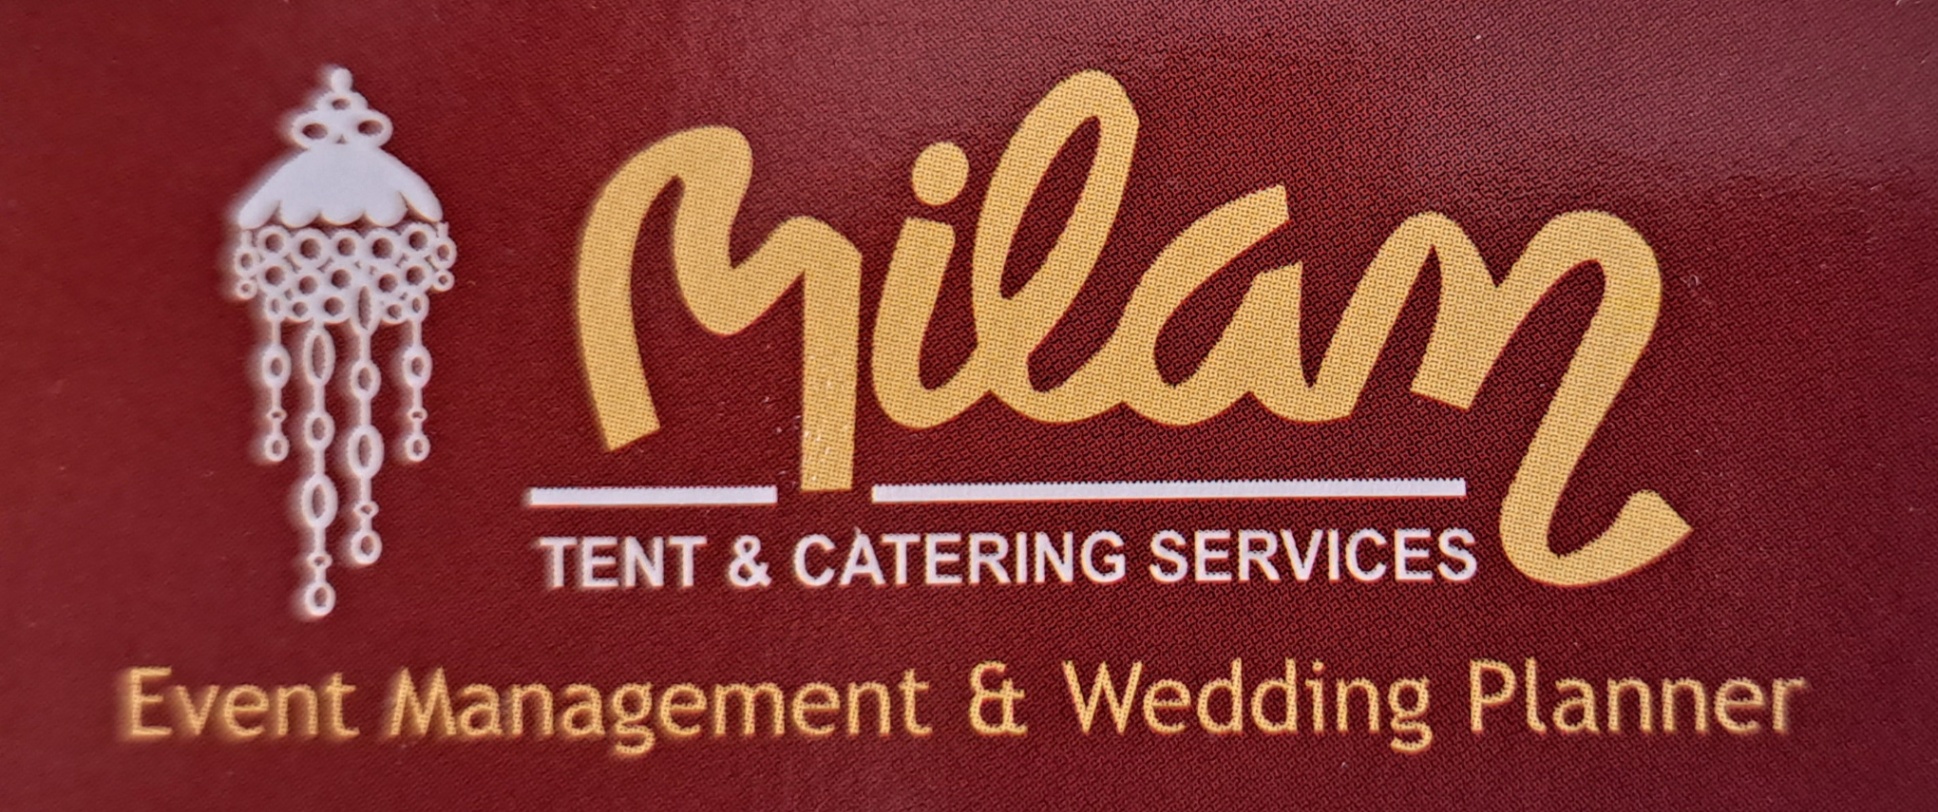 Wedding Catering, Corporate Catering; Exp: More than 15 year